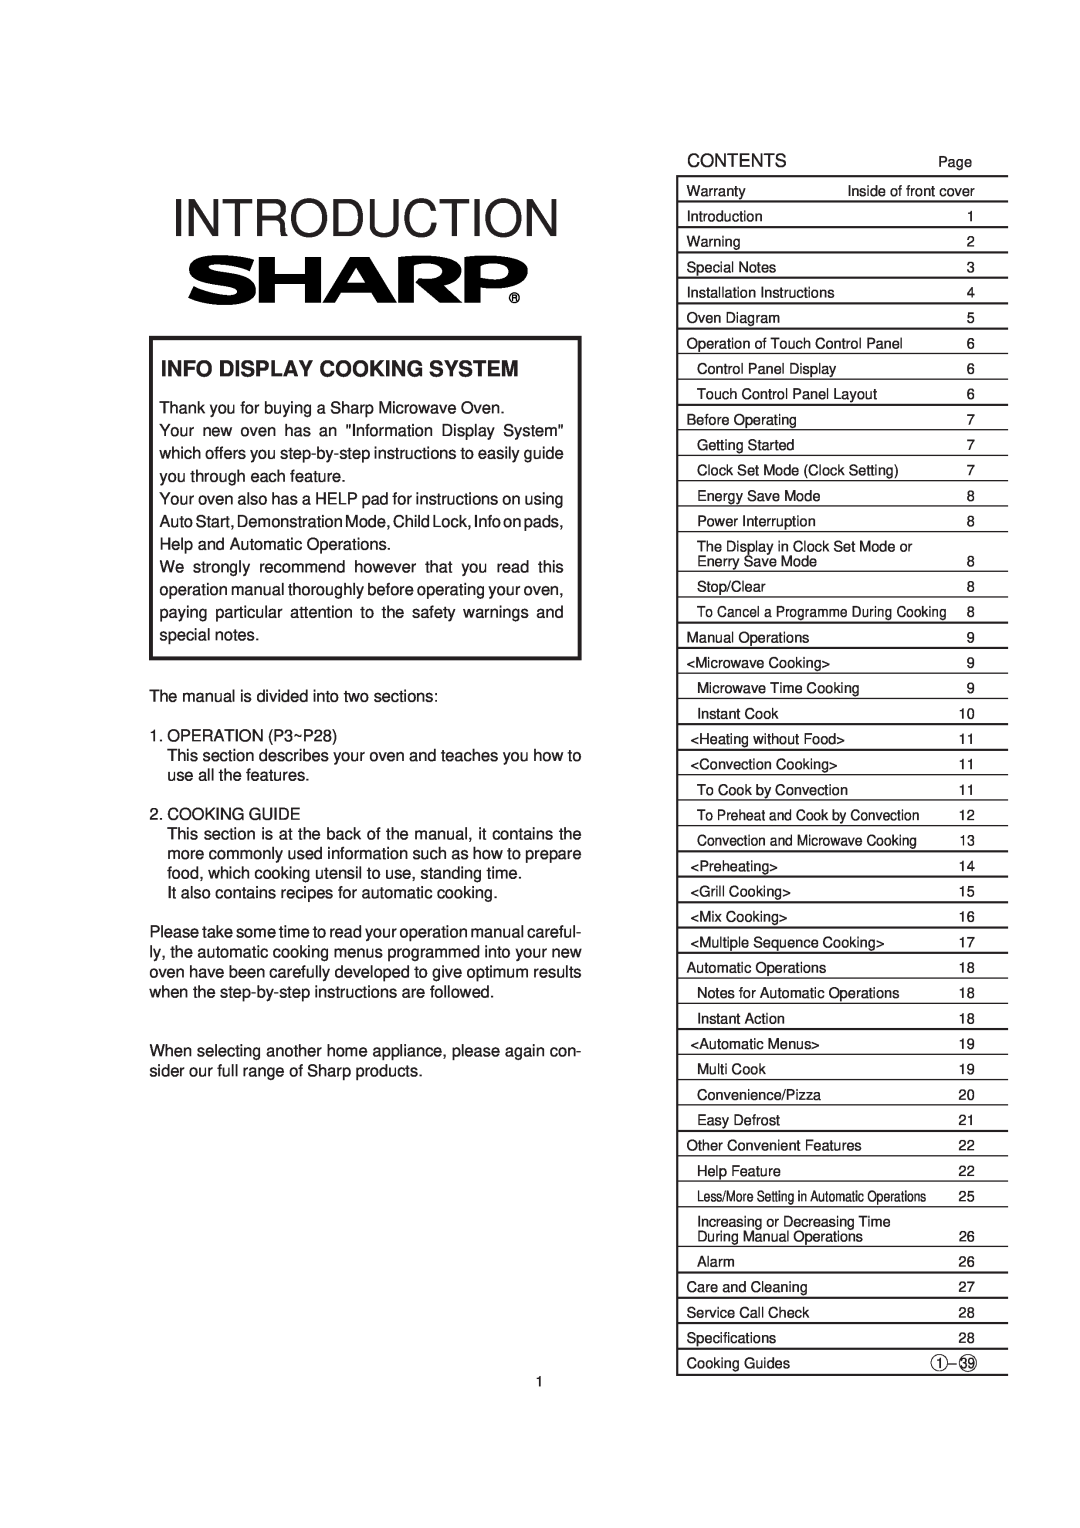 Sharp R-890N operation manual Info Display Cooking System, Contents, Introduction 